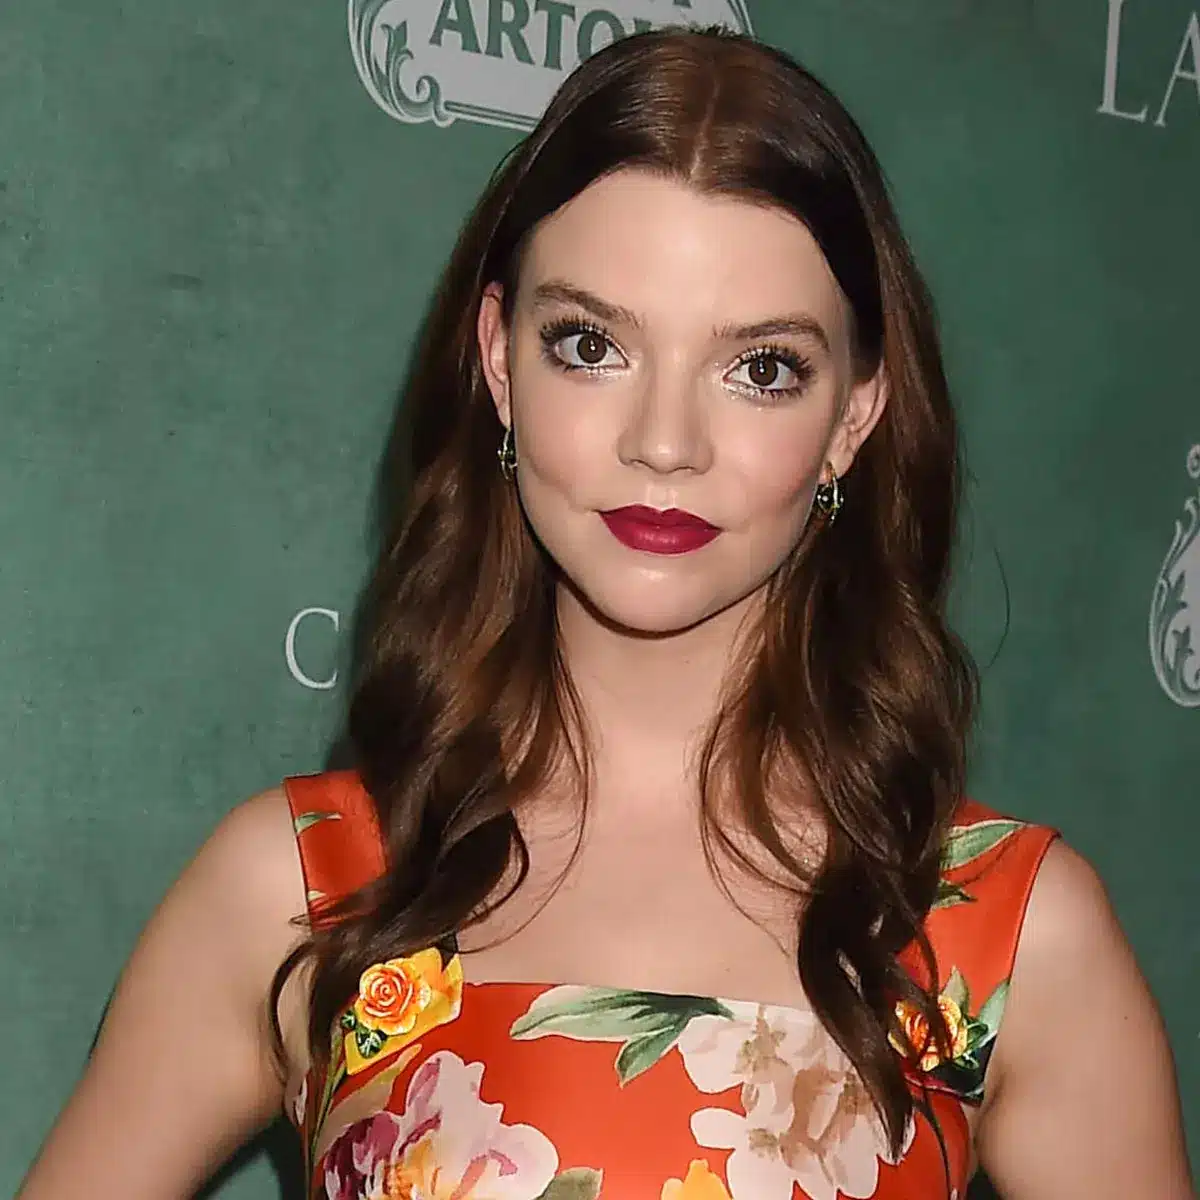 Anya Taylor-Joy and boyfriend marry in 'intimate courthouse